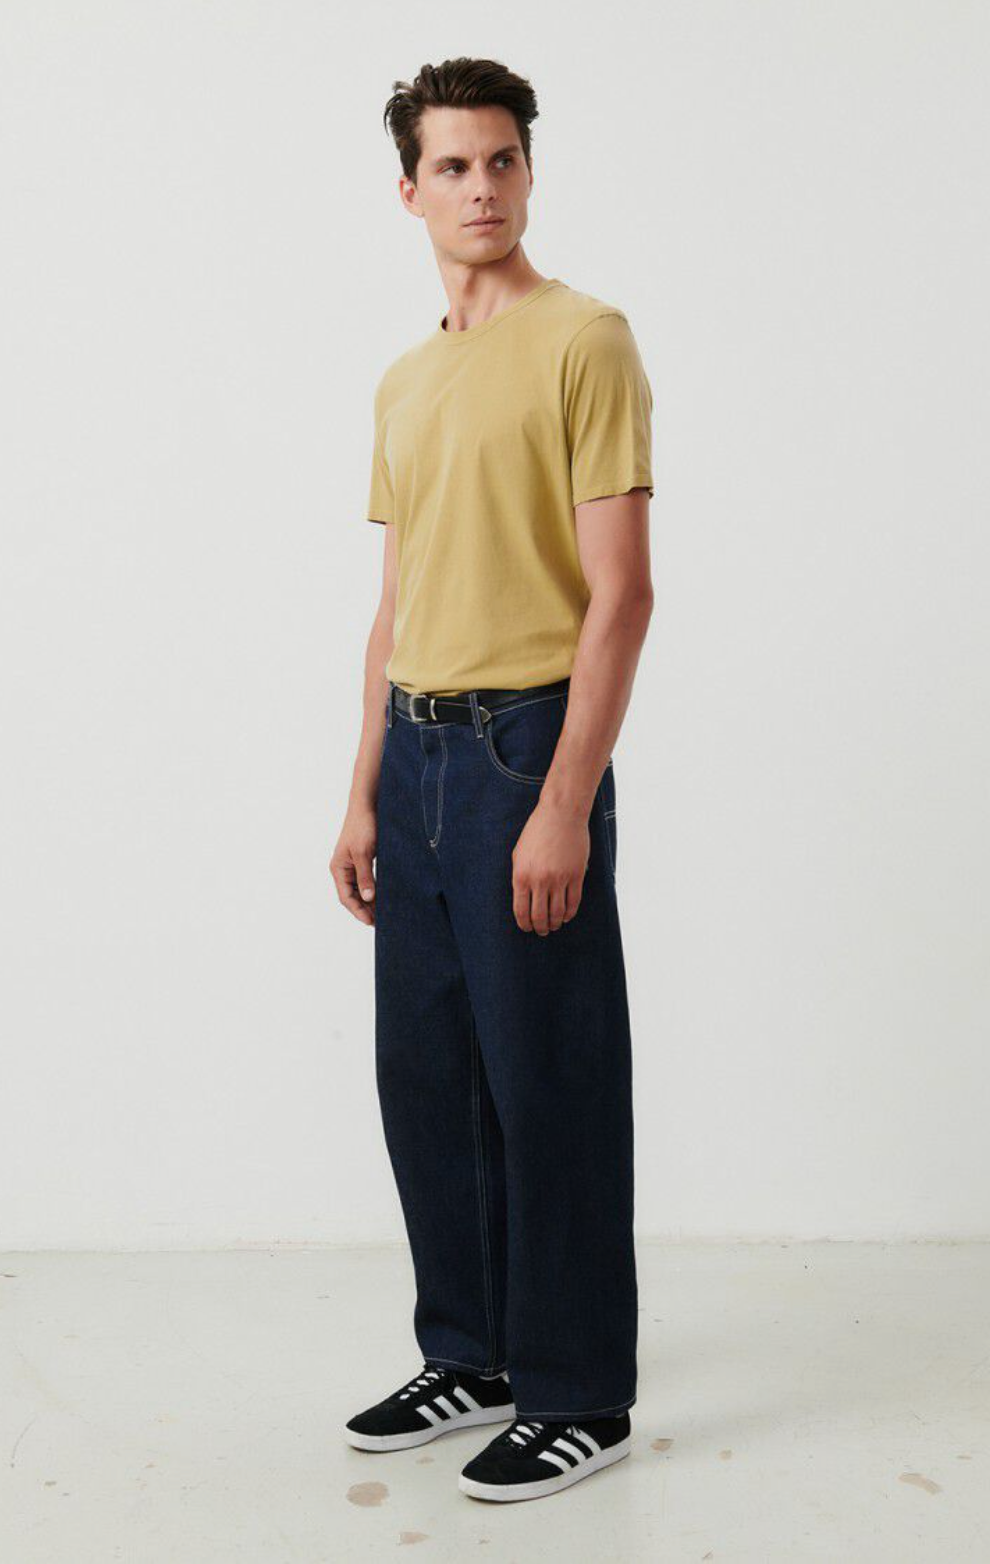 A full body front facing image of a male model standing at an angle while wearing the Devon t-shirt in vintage safari tucked into dark denim